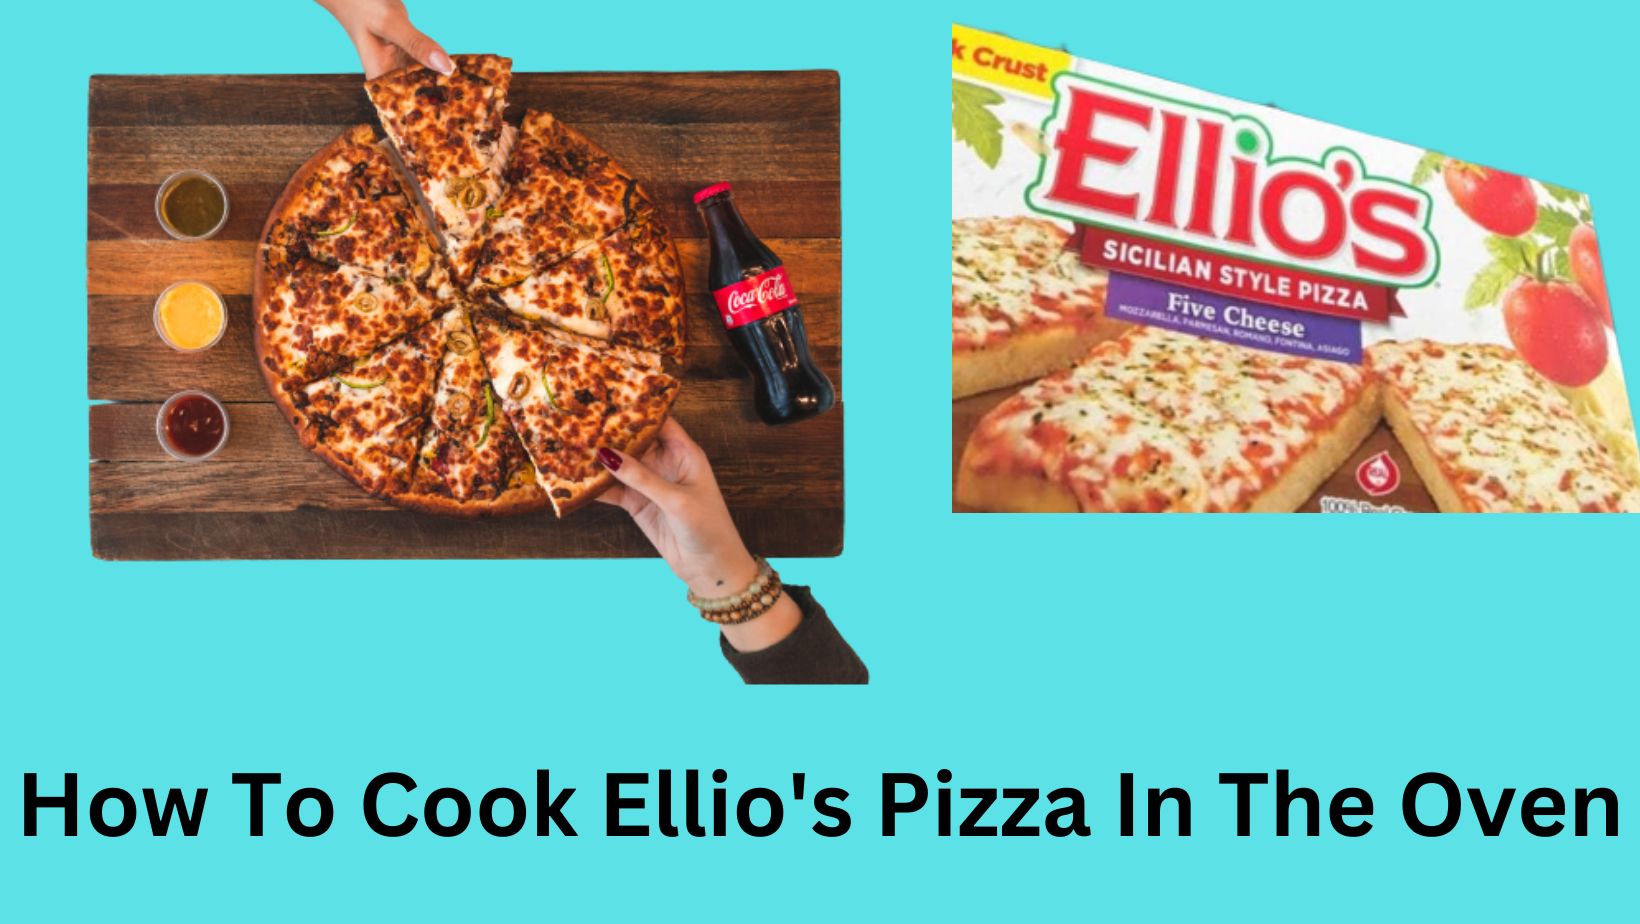 How To Cook Ellio's Pizza In The Oven